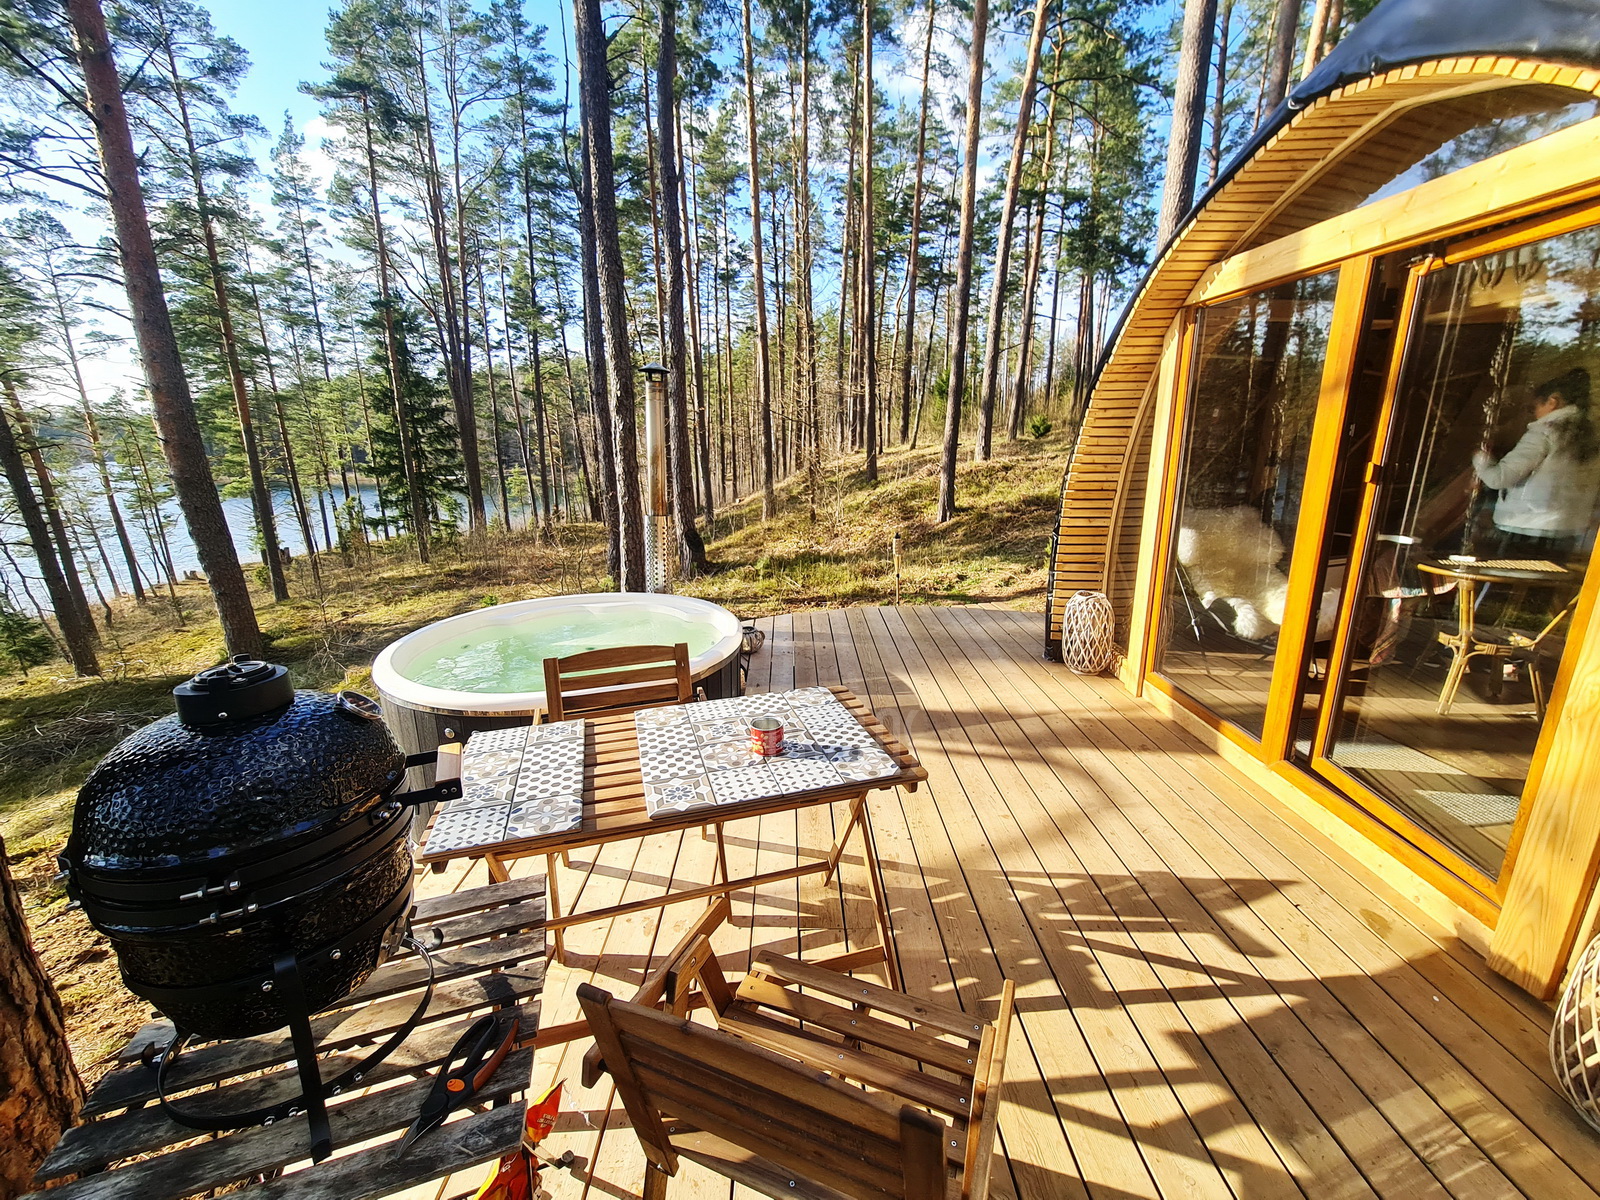 Connect with nature | Eco Living in forest | GLAMPINGLITHUANIA